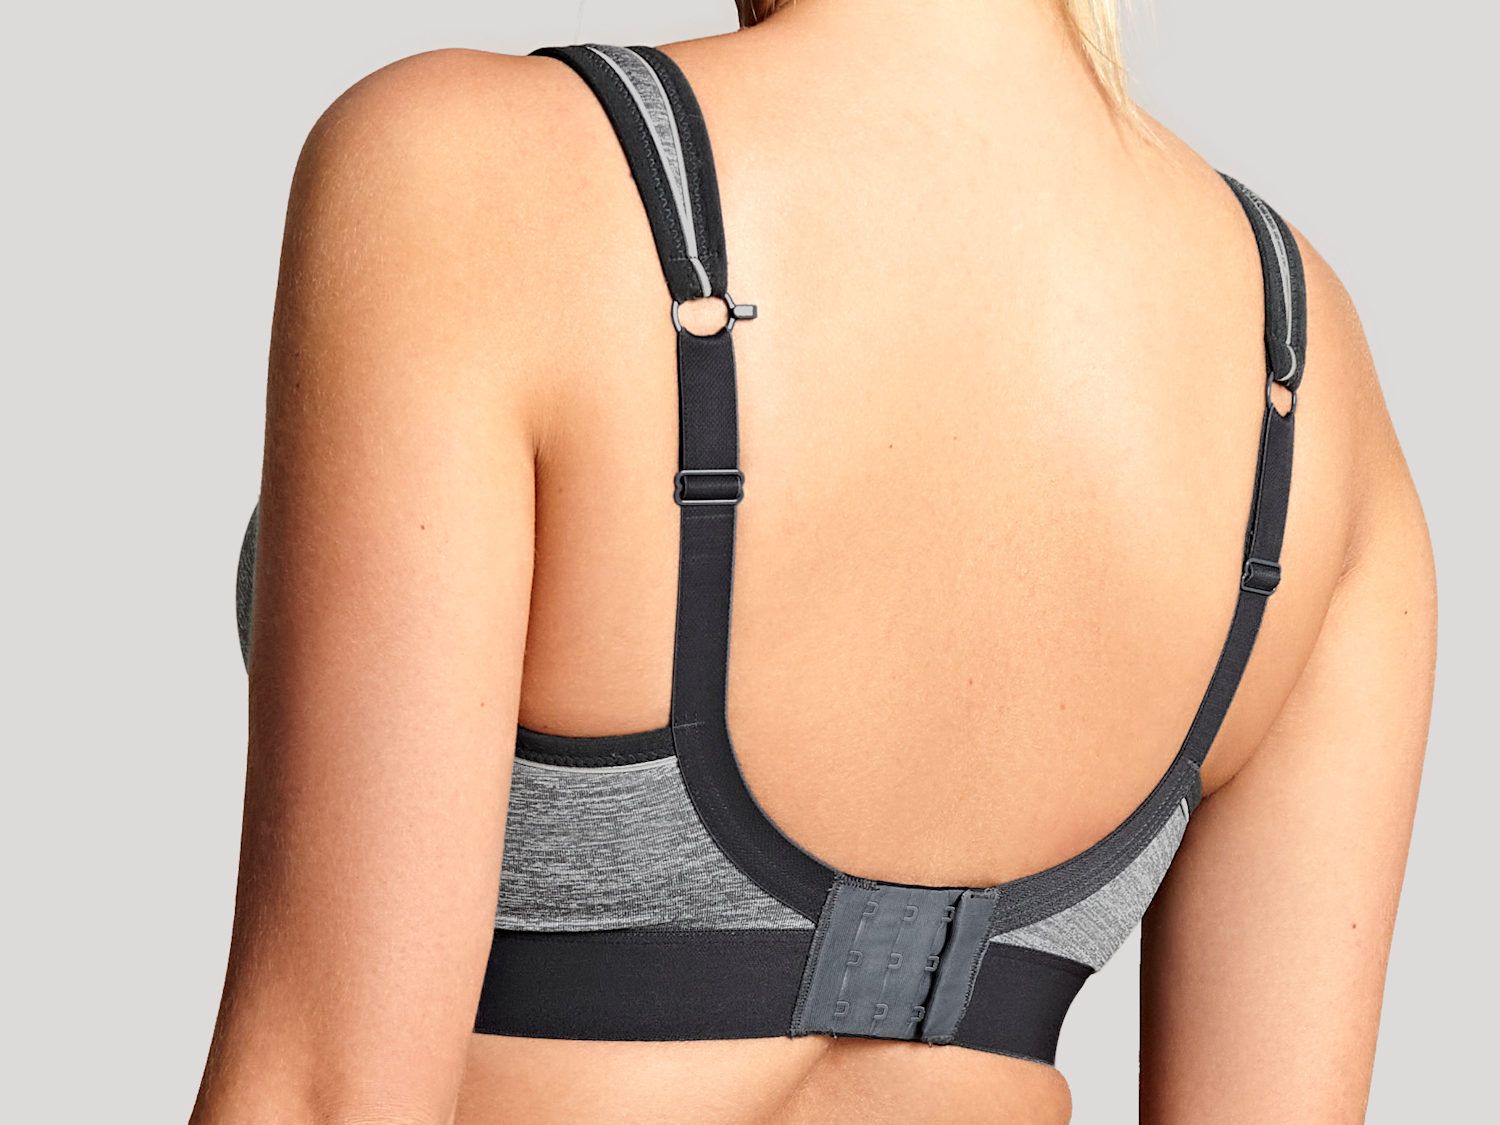 Sports Non Wired Sports Non Wired Bra abstract animal 7341B